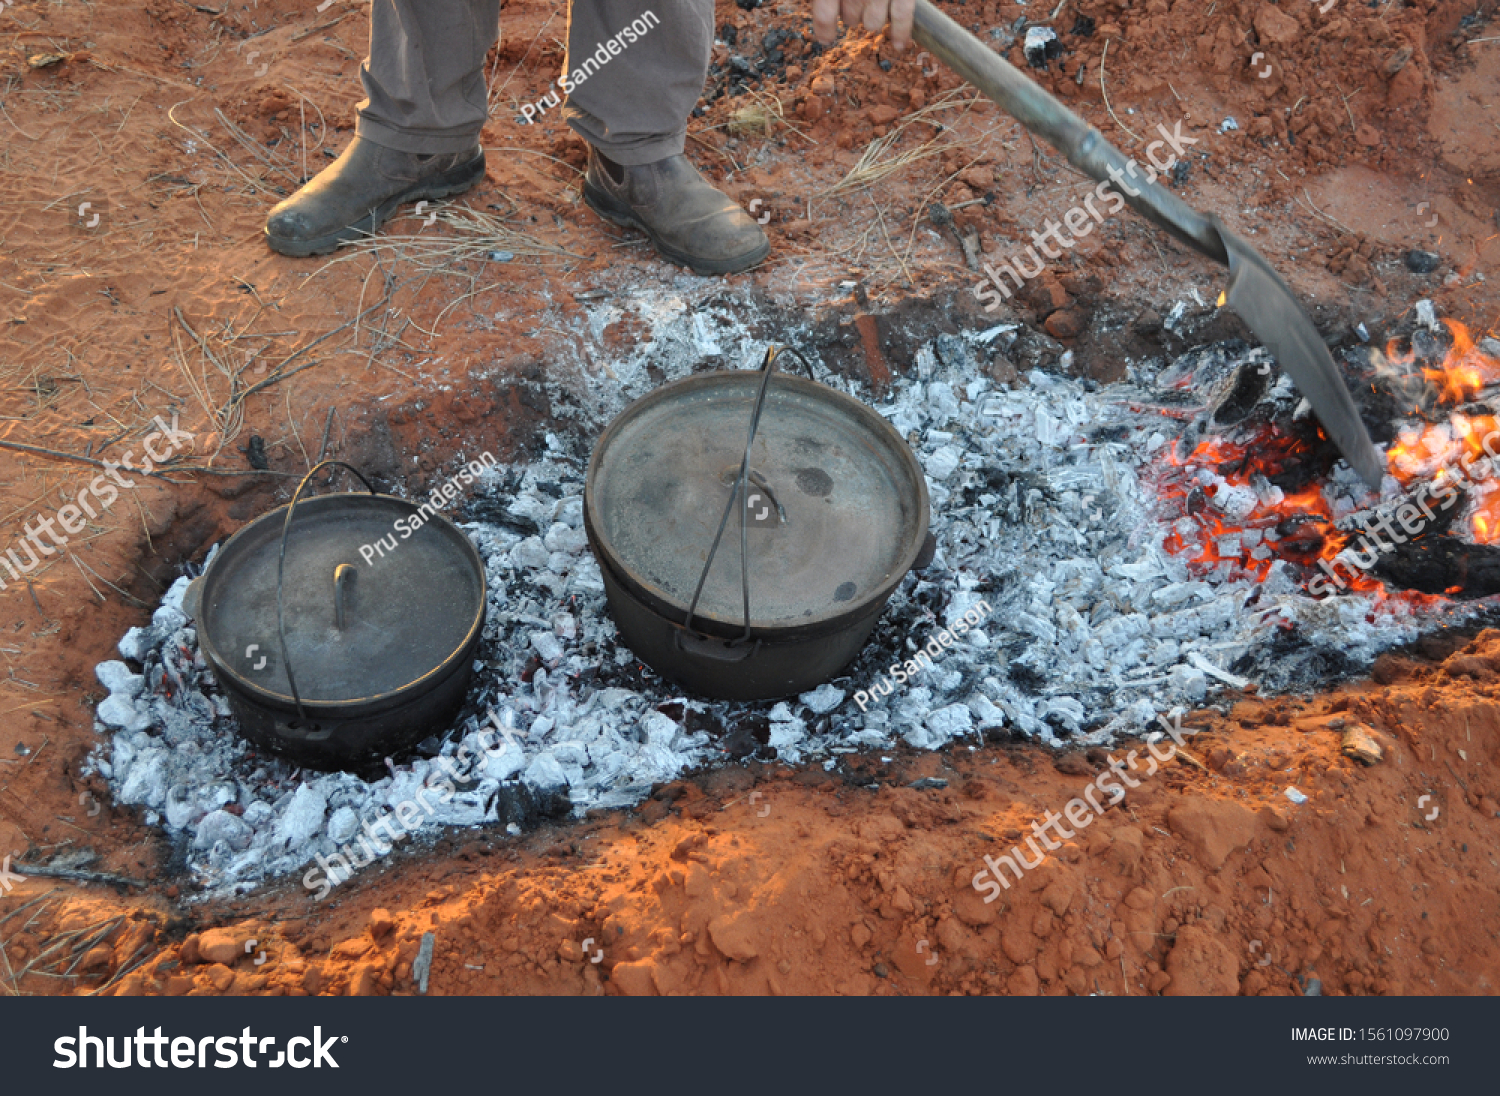 Cooking dinner in camp (Dutch) ovens over hot coals in the red sand of the Australian outback